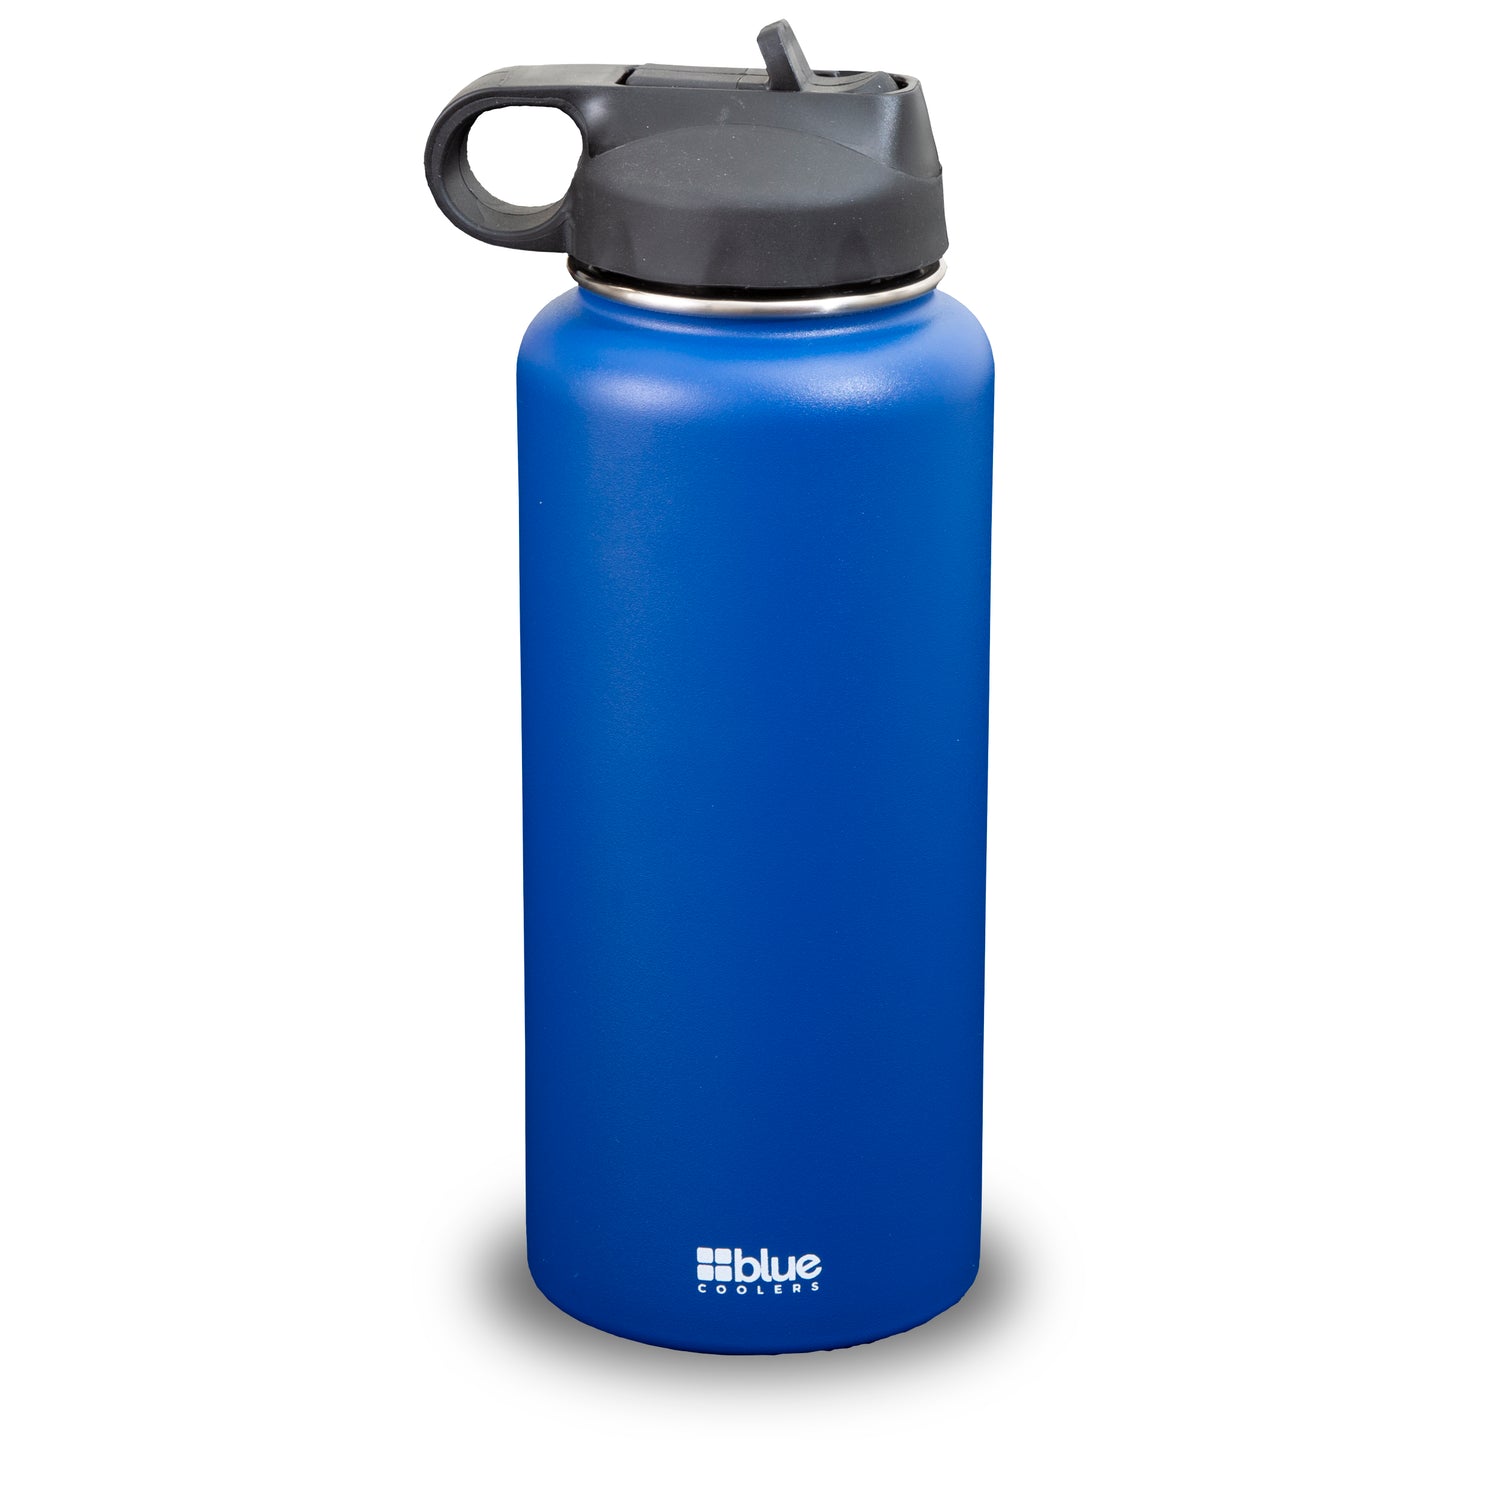 NTPC Customized - 32 oz. Steel Double-wall Vacuum Insulated Flask (Flip Top Lid)